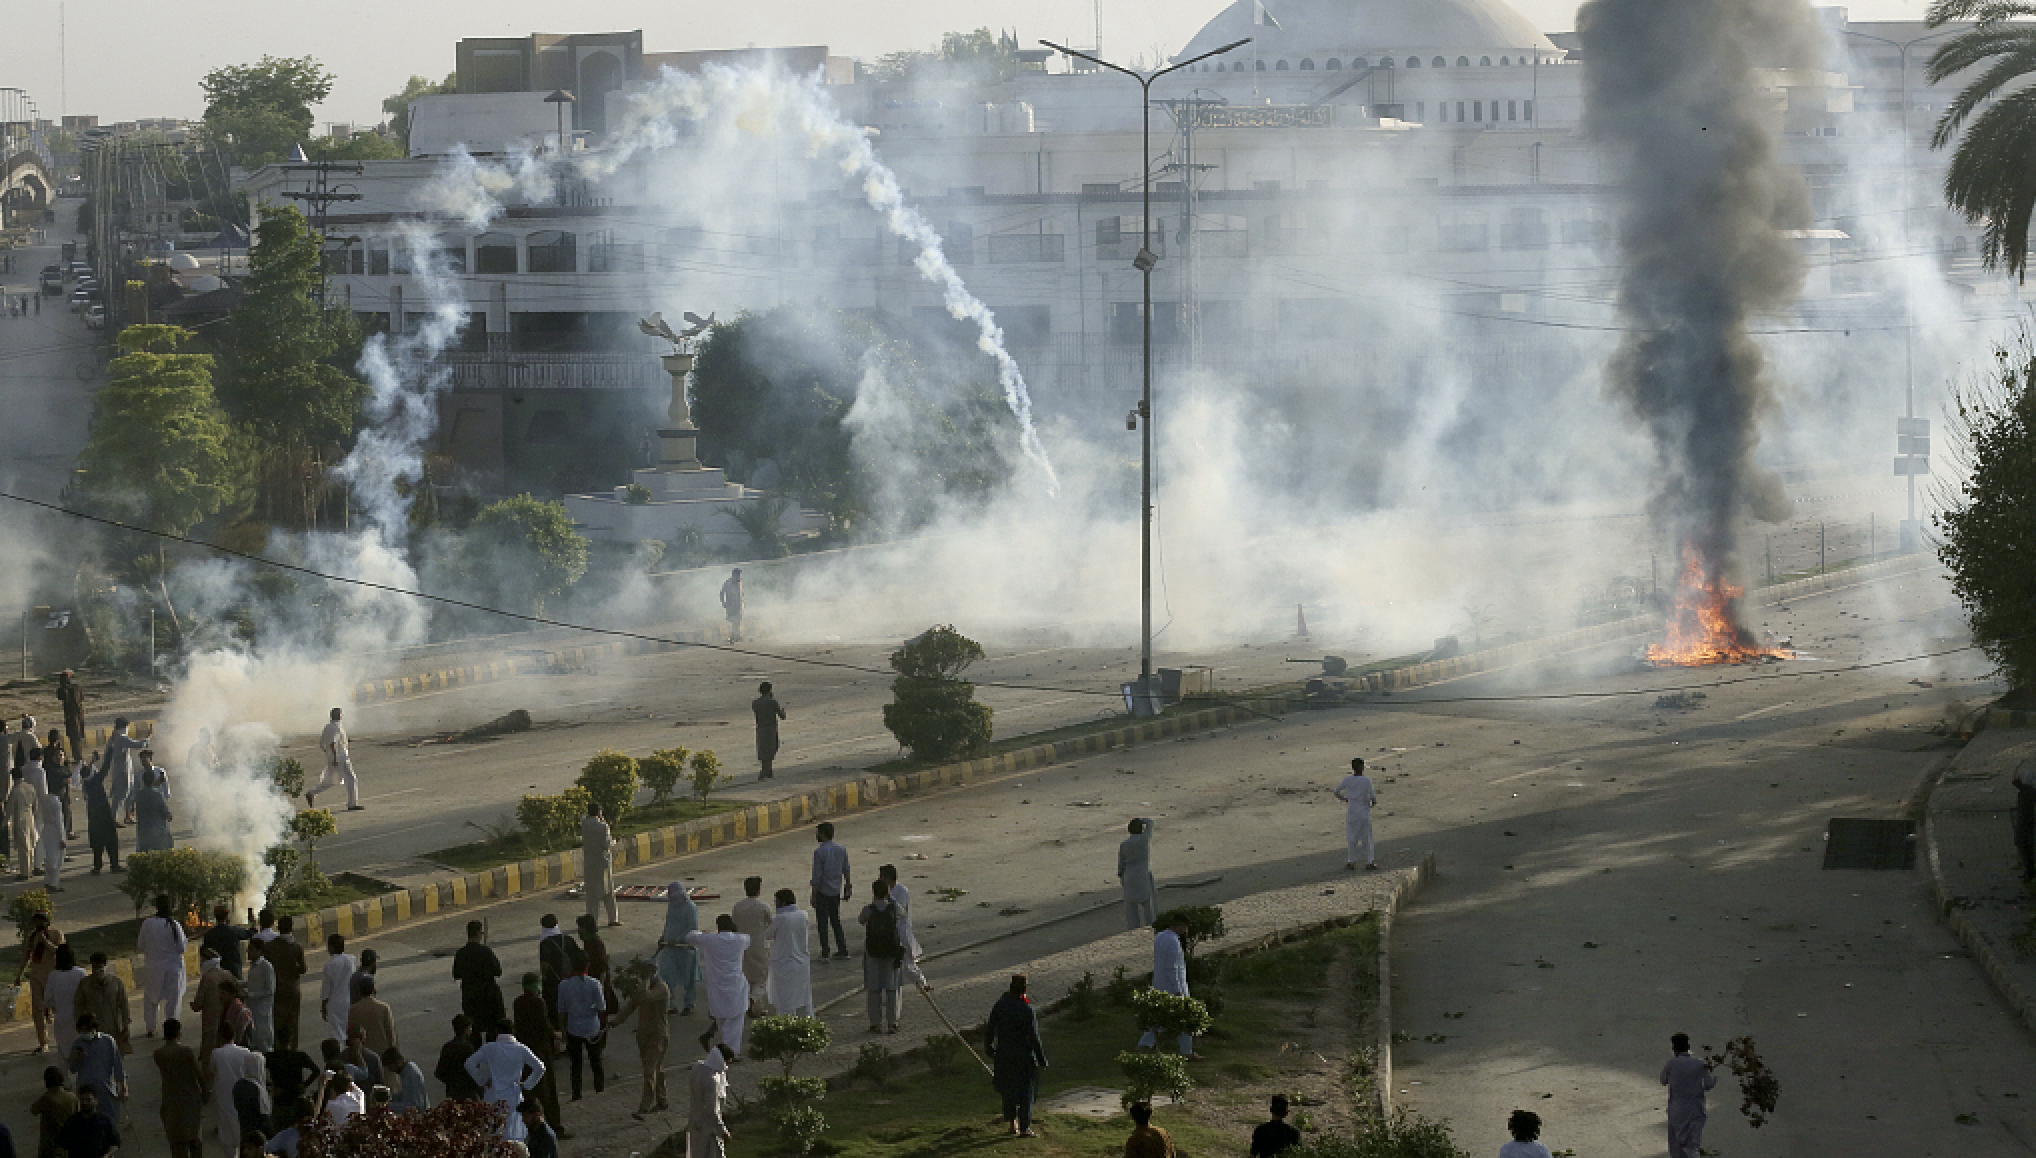 Police fire tear gas to disperse supporters of Pakistan's former Prime Minister Imran Khan protesting against the arrest of their leader, in Peshawar, Pakistan, Tuesday, May 9, 2023. /CFP